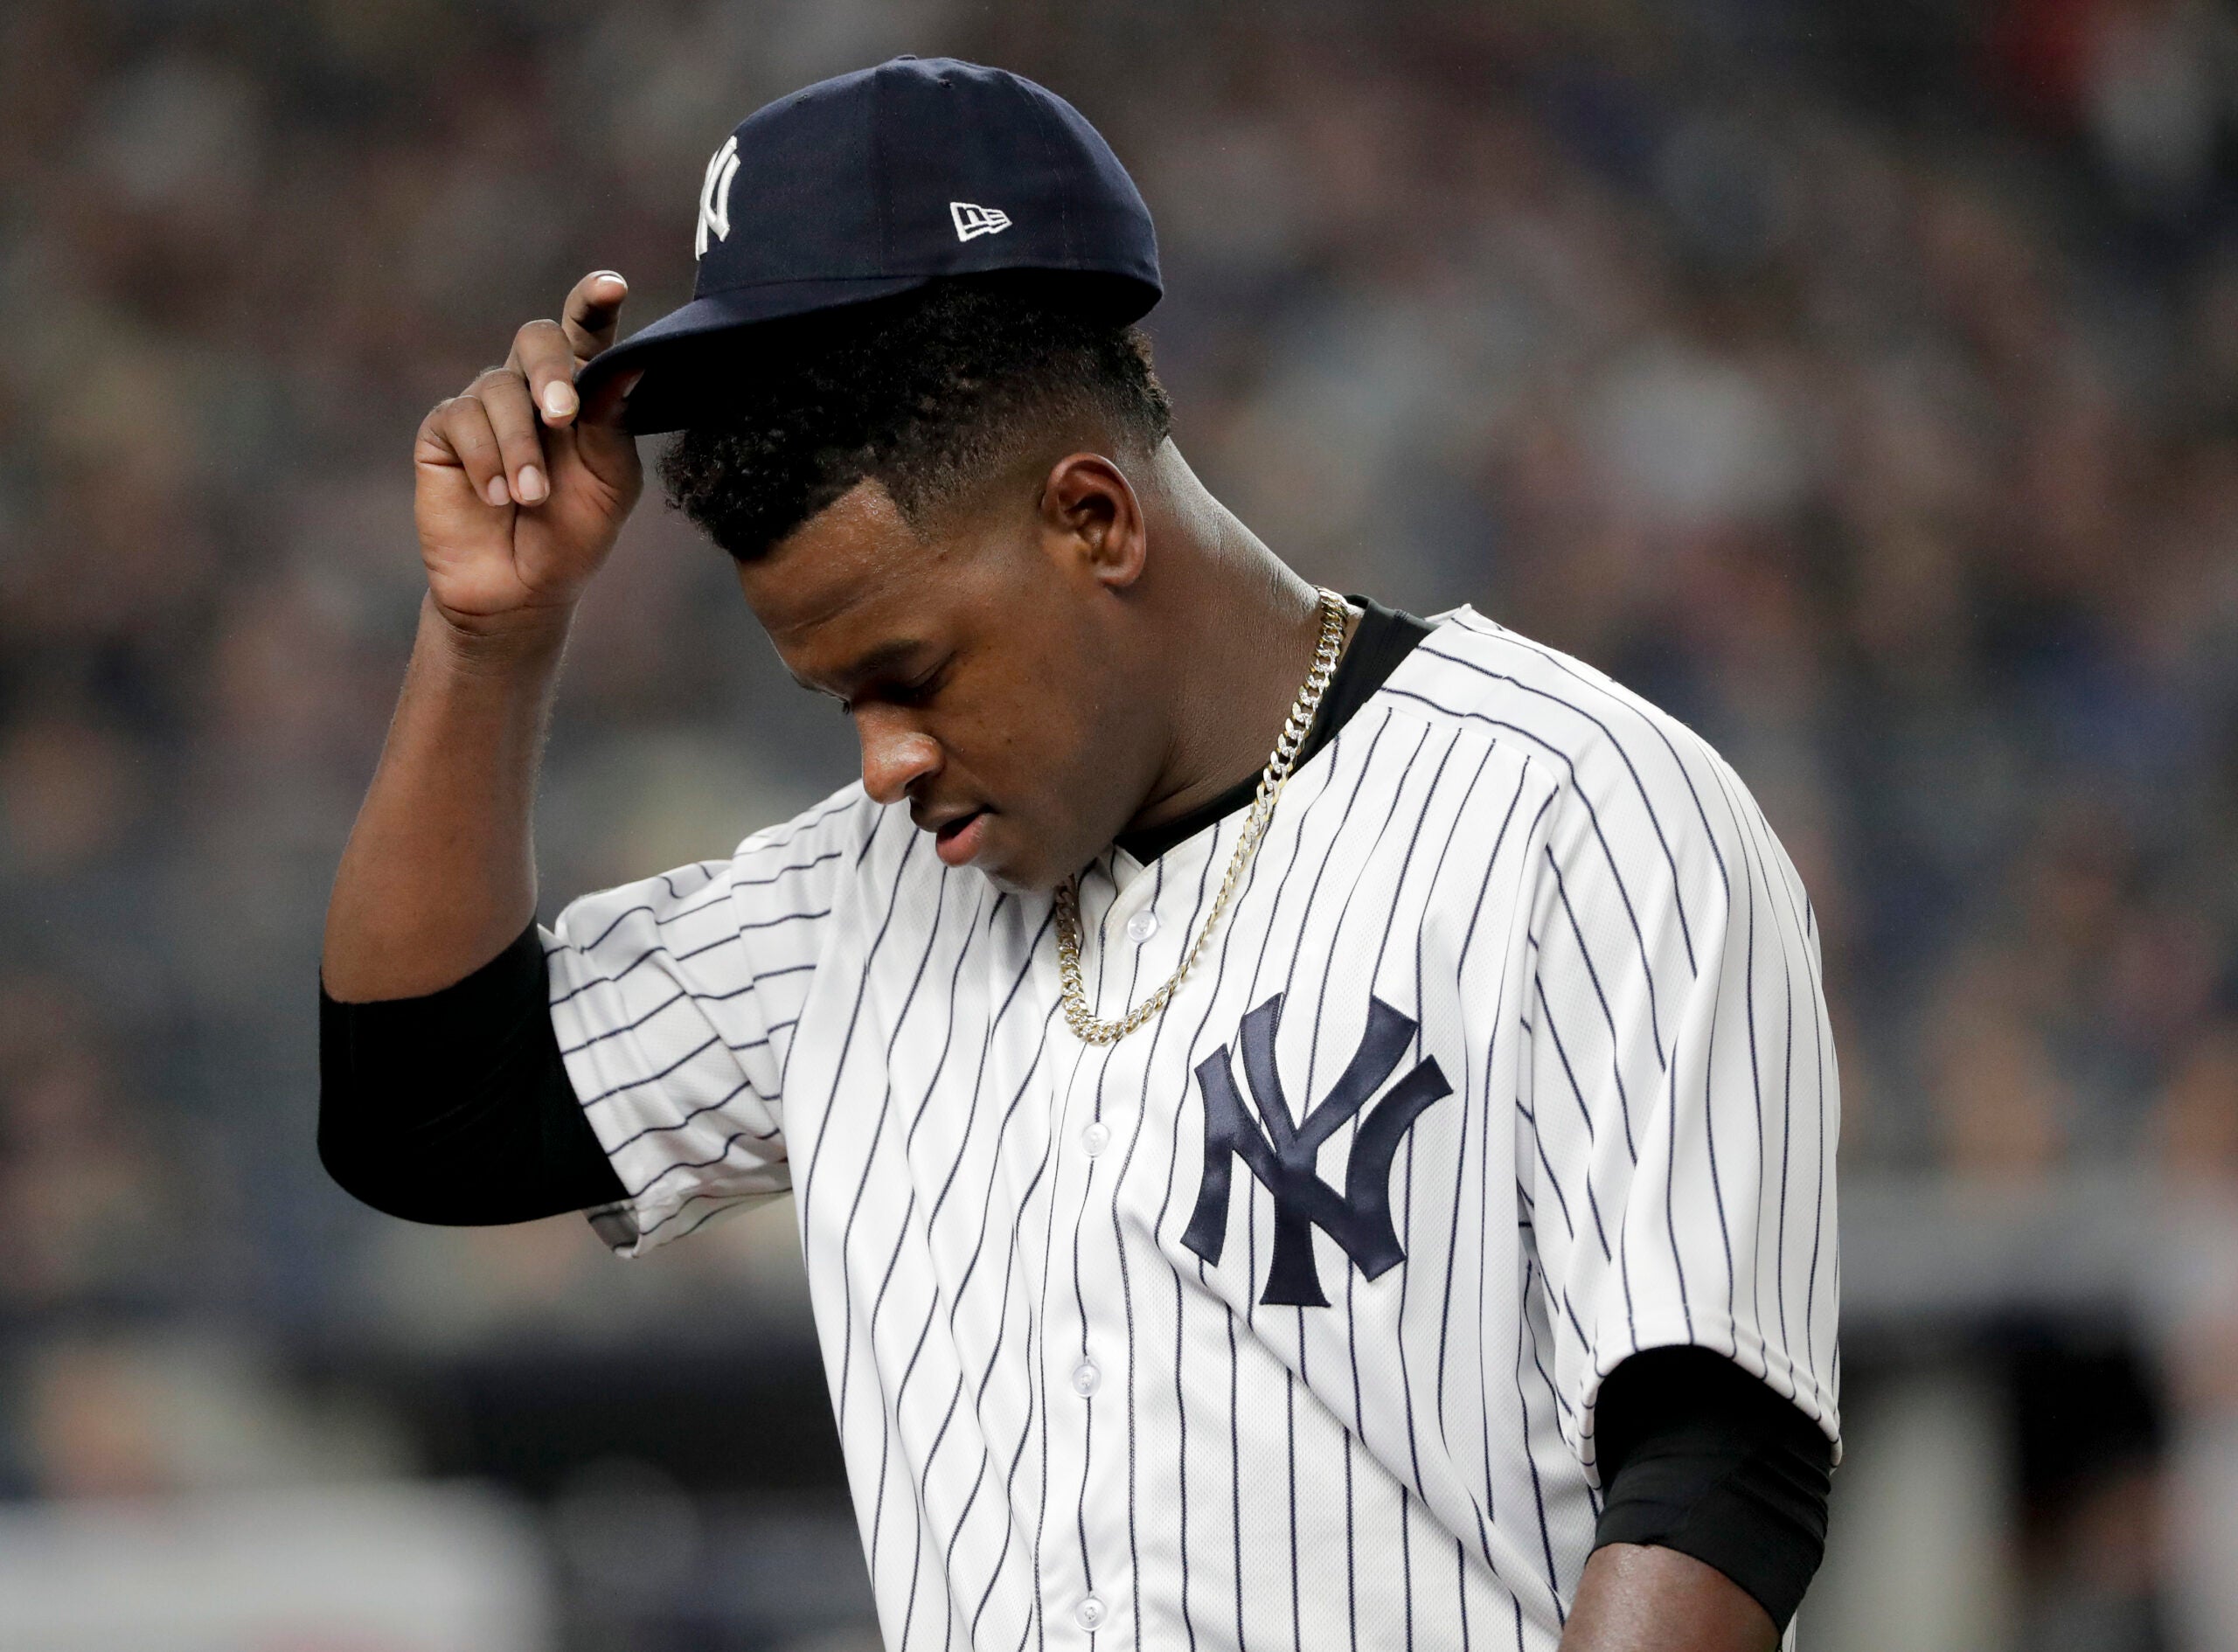 NEW YORK (AP) — Luis Severino is pitching like an ace for